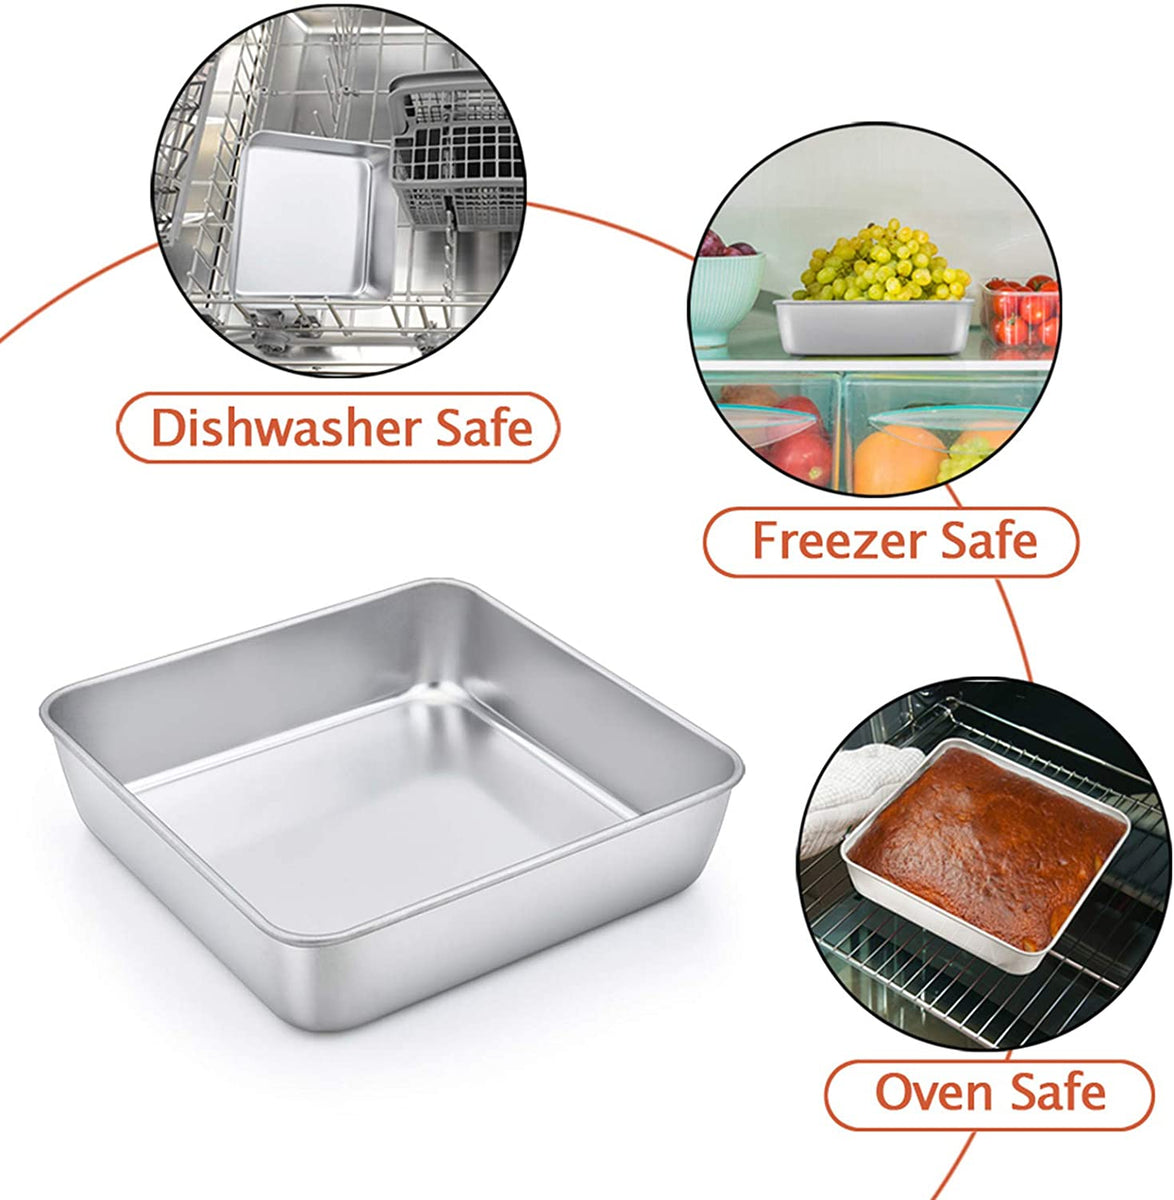 THE PAMPERED CHEF Aluminized Steel Metal Baking Pan 8X8 Square Brownies  Cakes